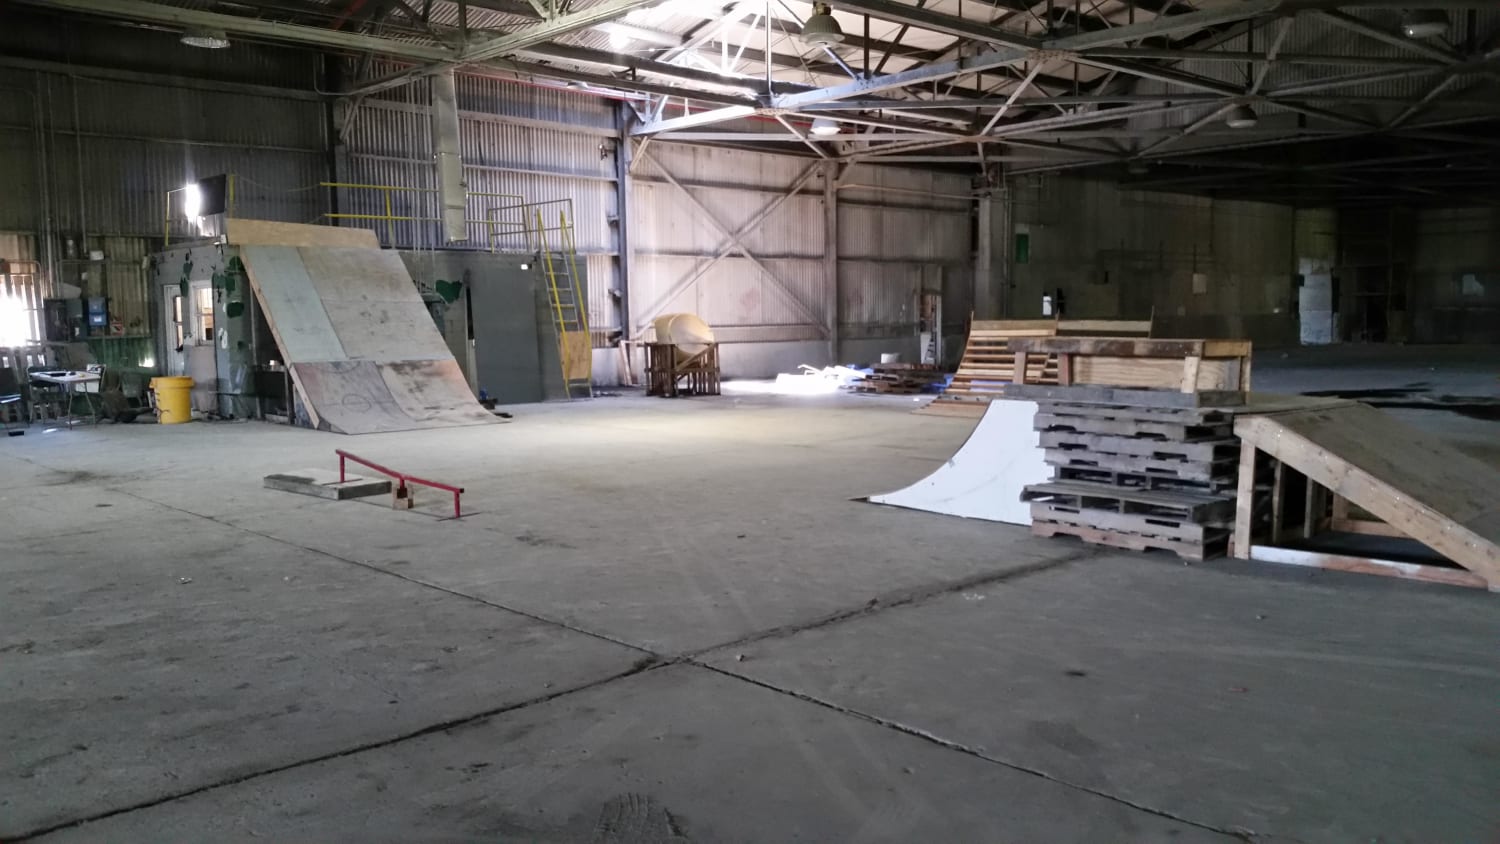 This underground skate/BMX park I found while urban exploring. Hidden away in a huge dilapidated factory complex.